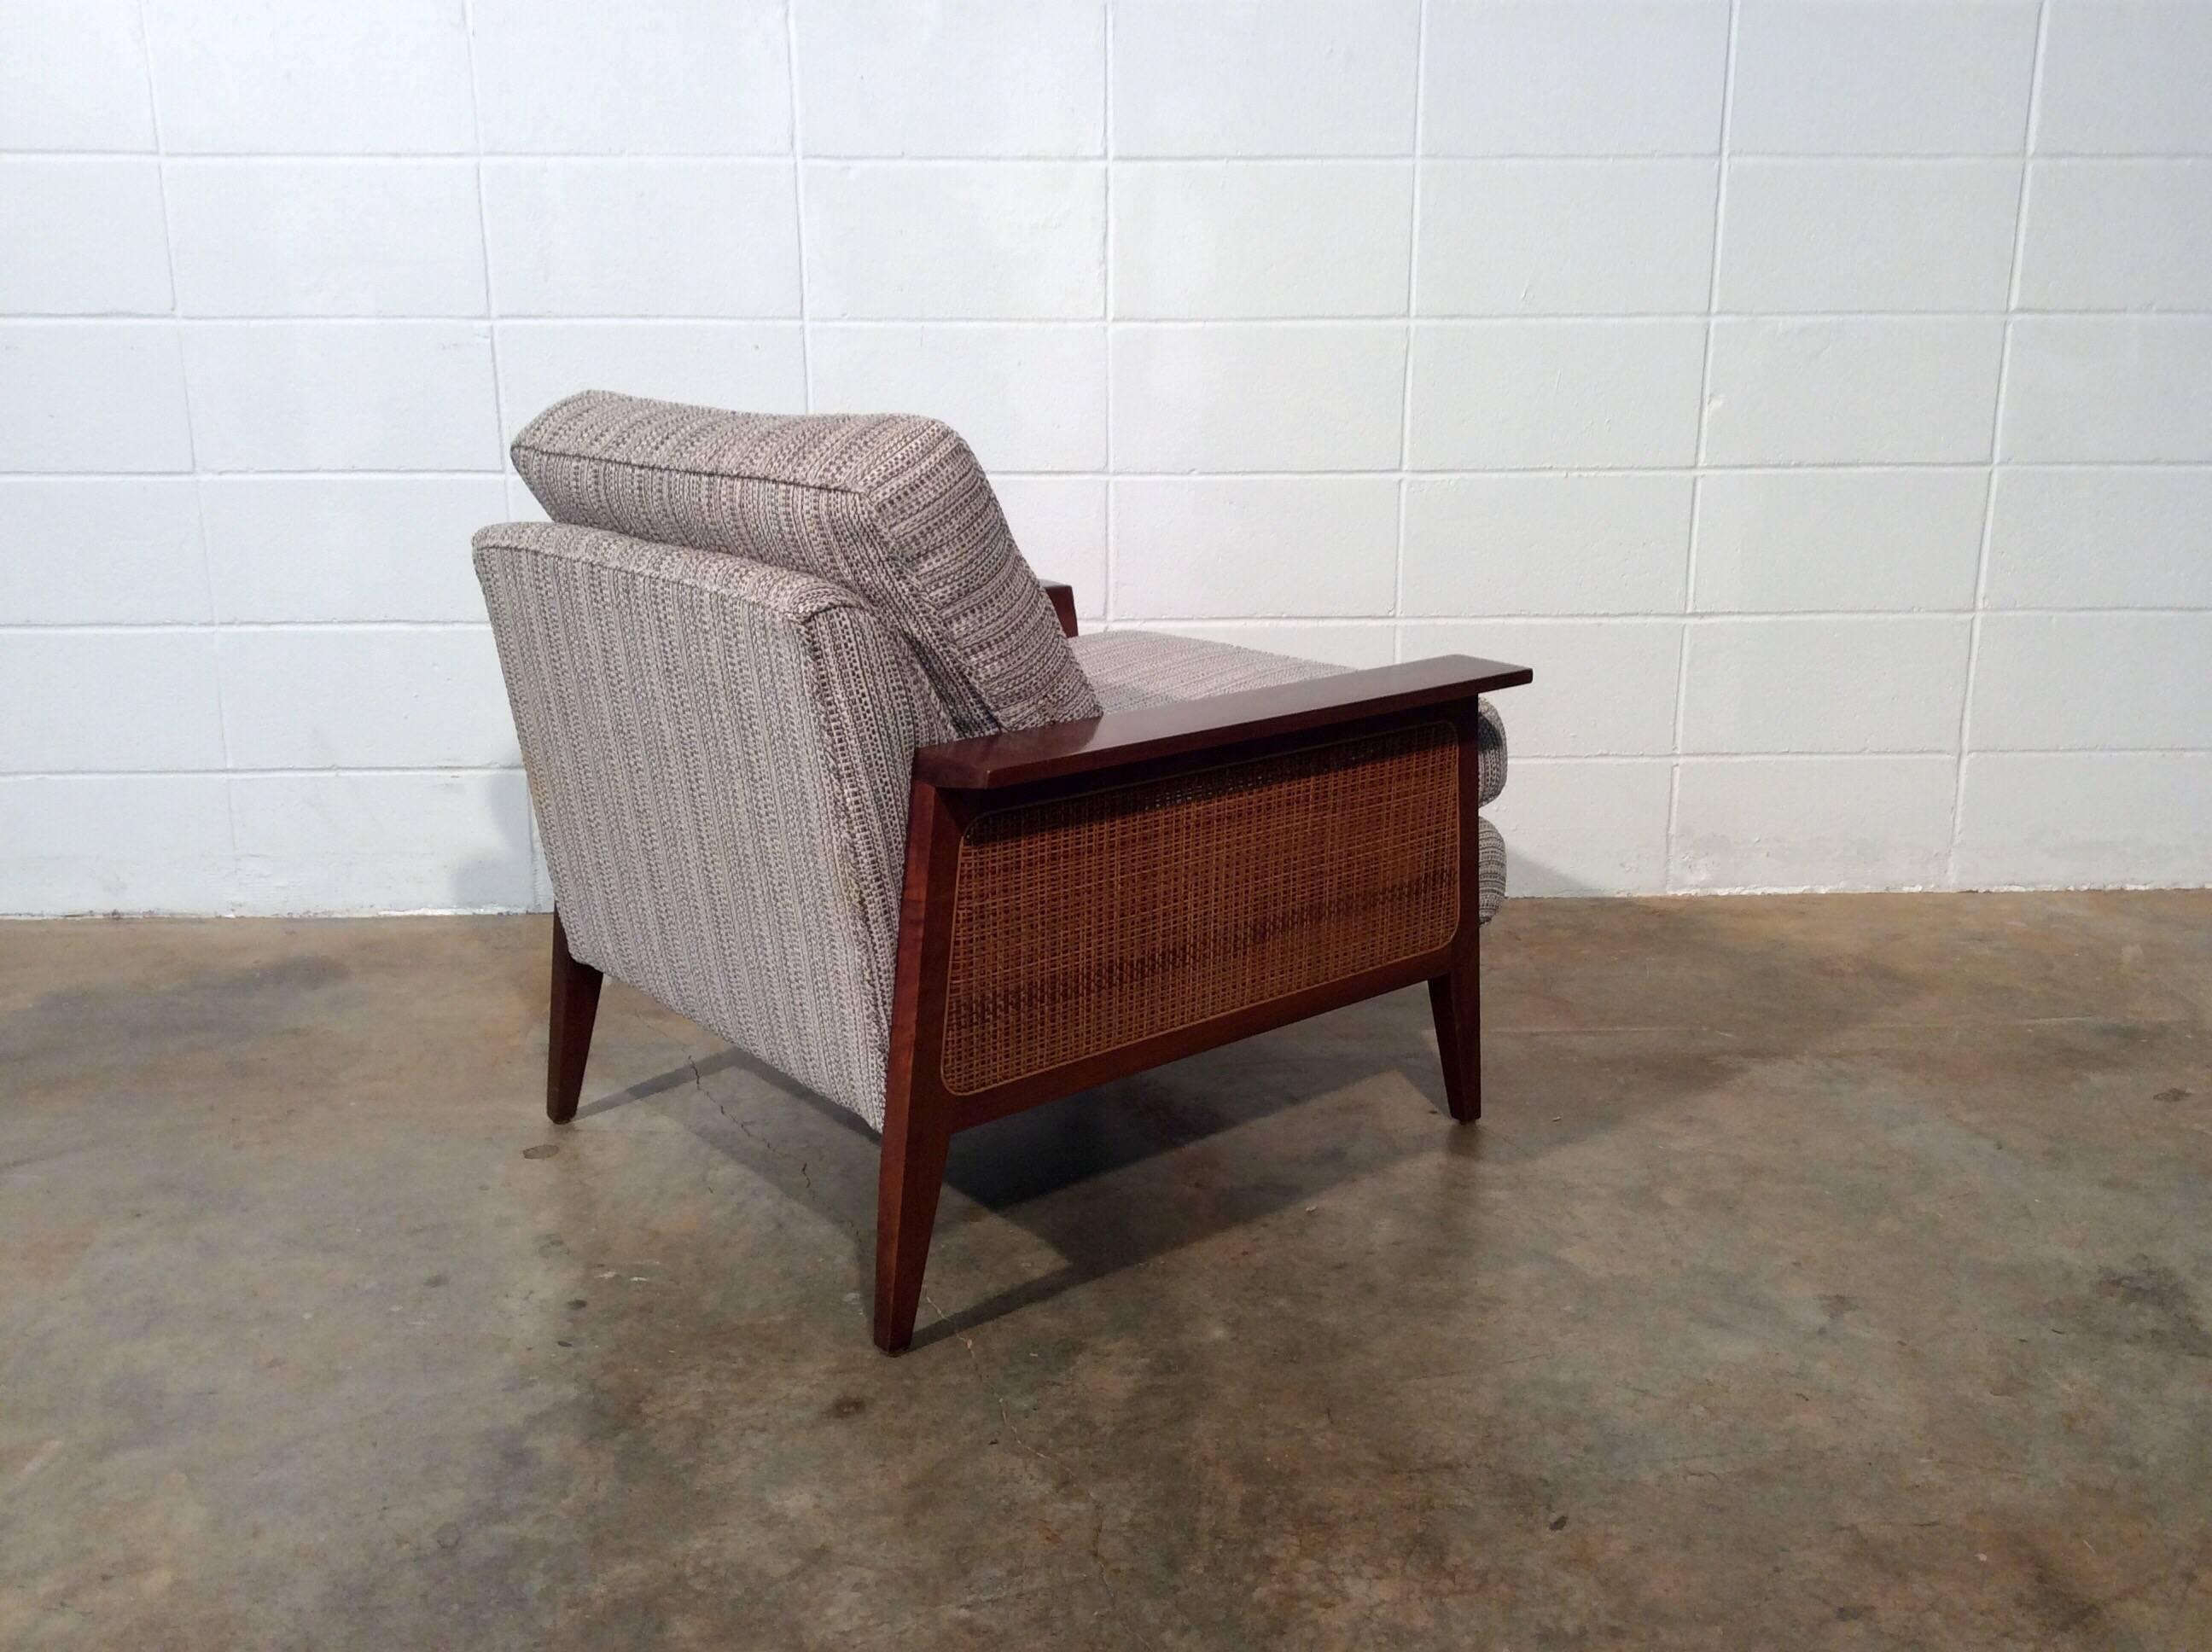 Unique and Restored Mid-Century Modern Chair by Iconic Galloways of Tampa 1